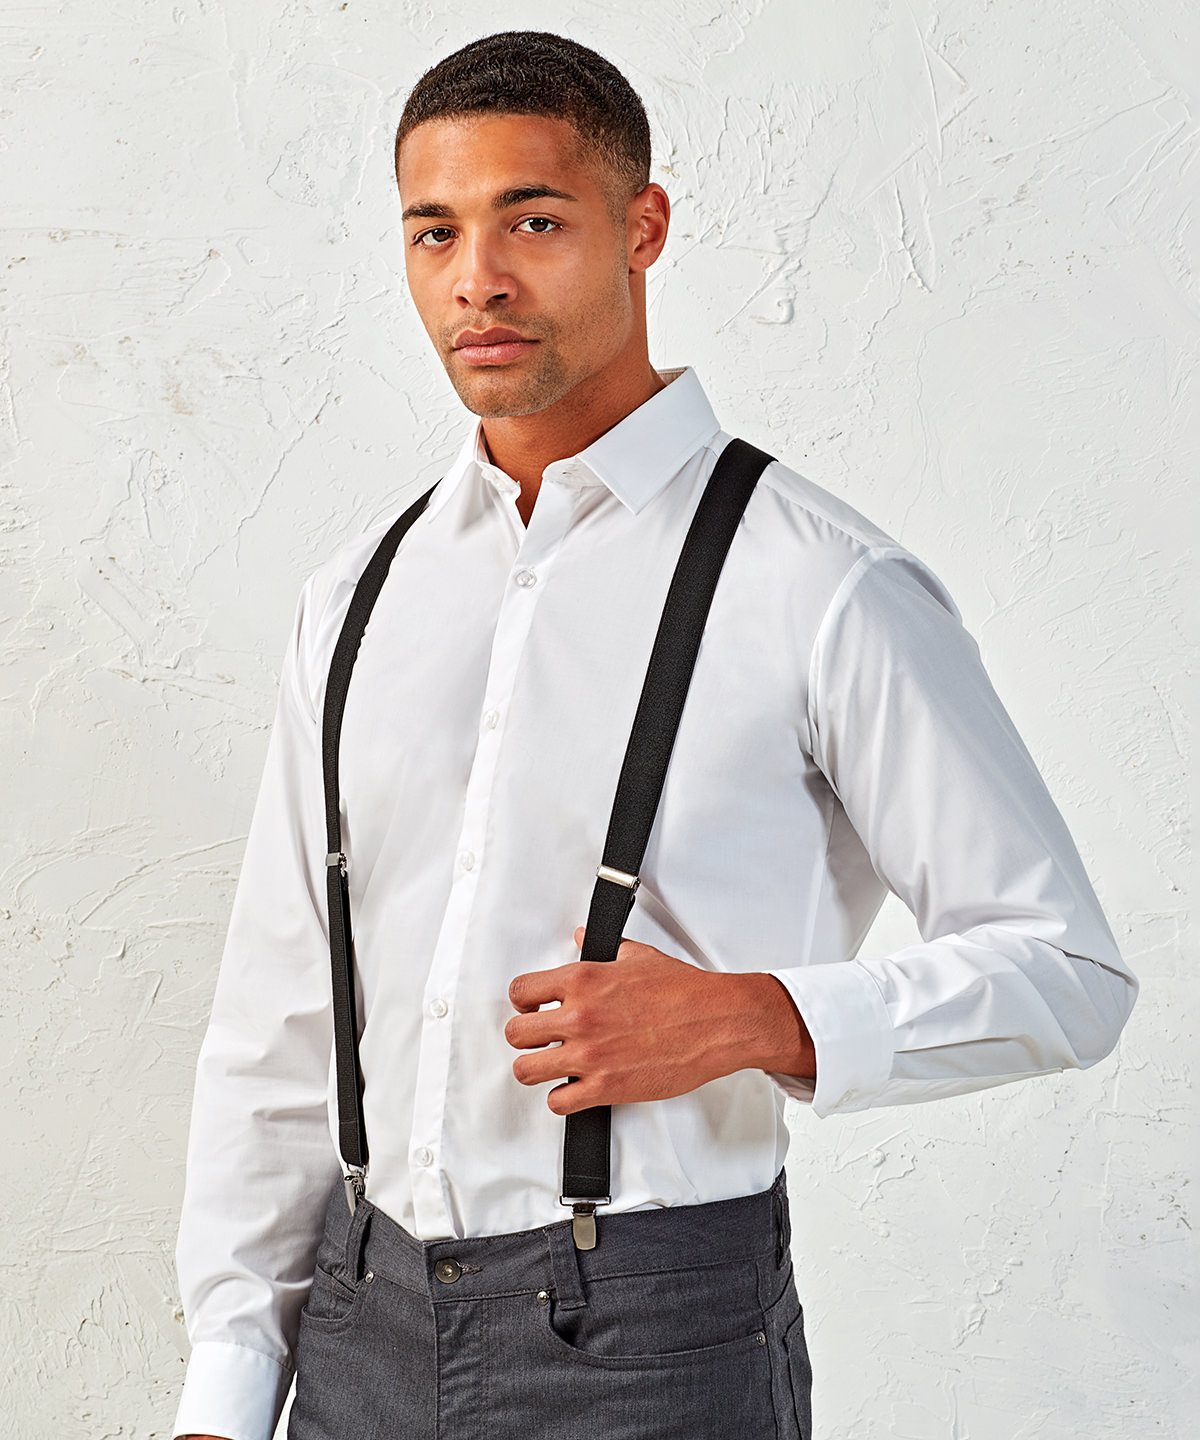 Trouser braces give a smart-refined look to a outfit or a cool and casual  approach depending on how you choose to style. Either way these braces are